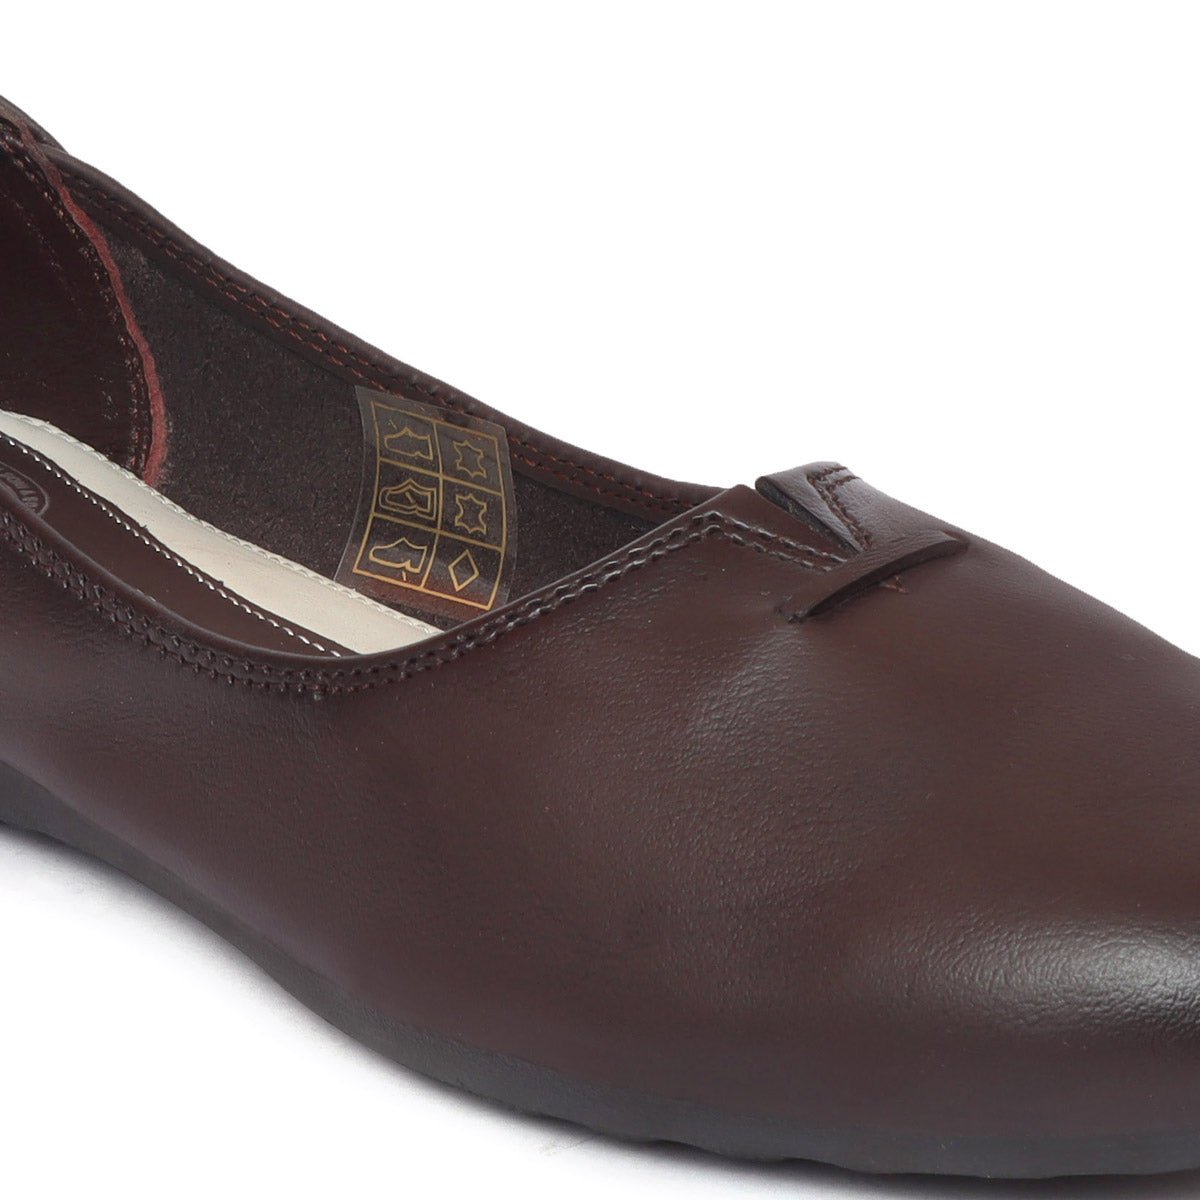 Bellies for women NV-111 brown4